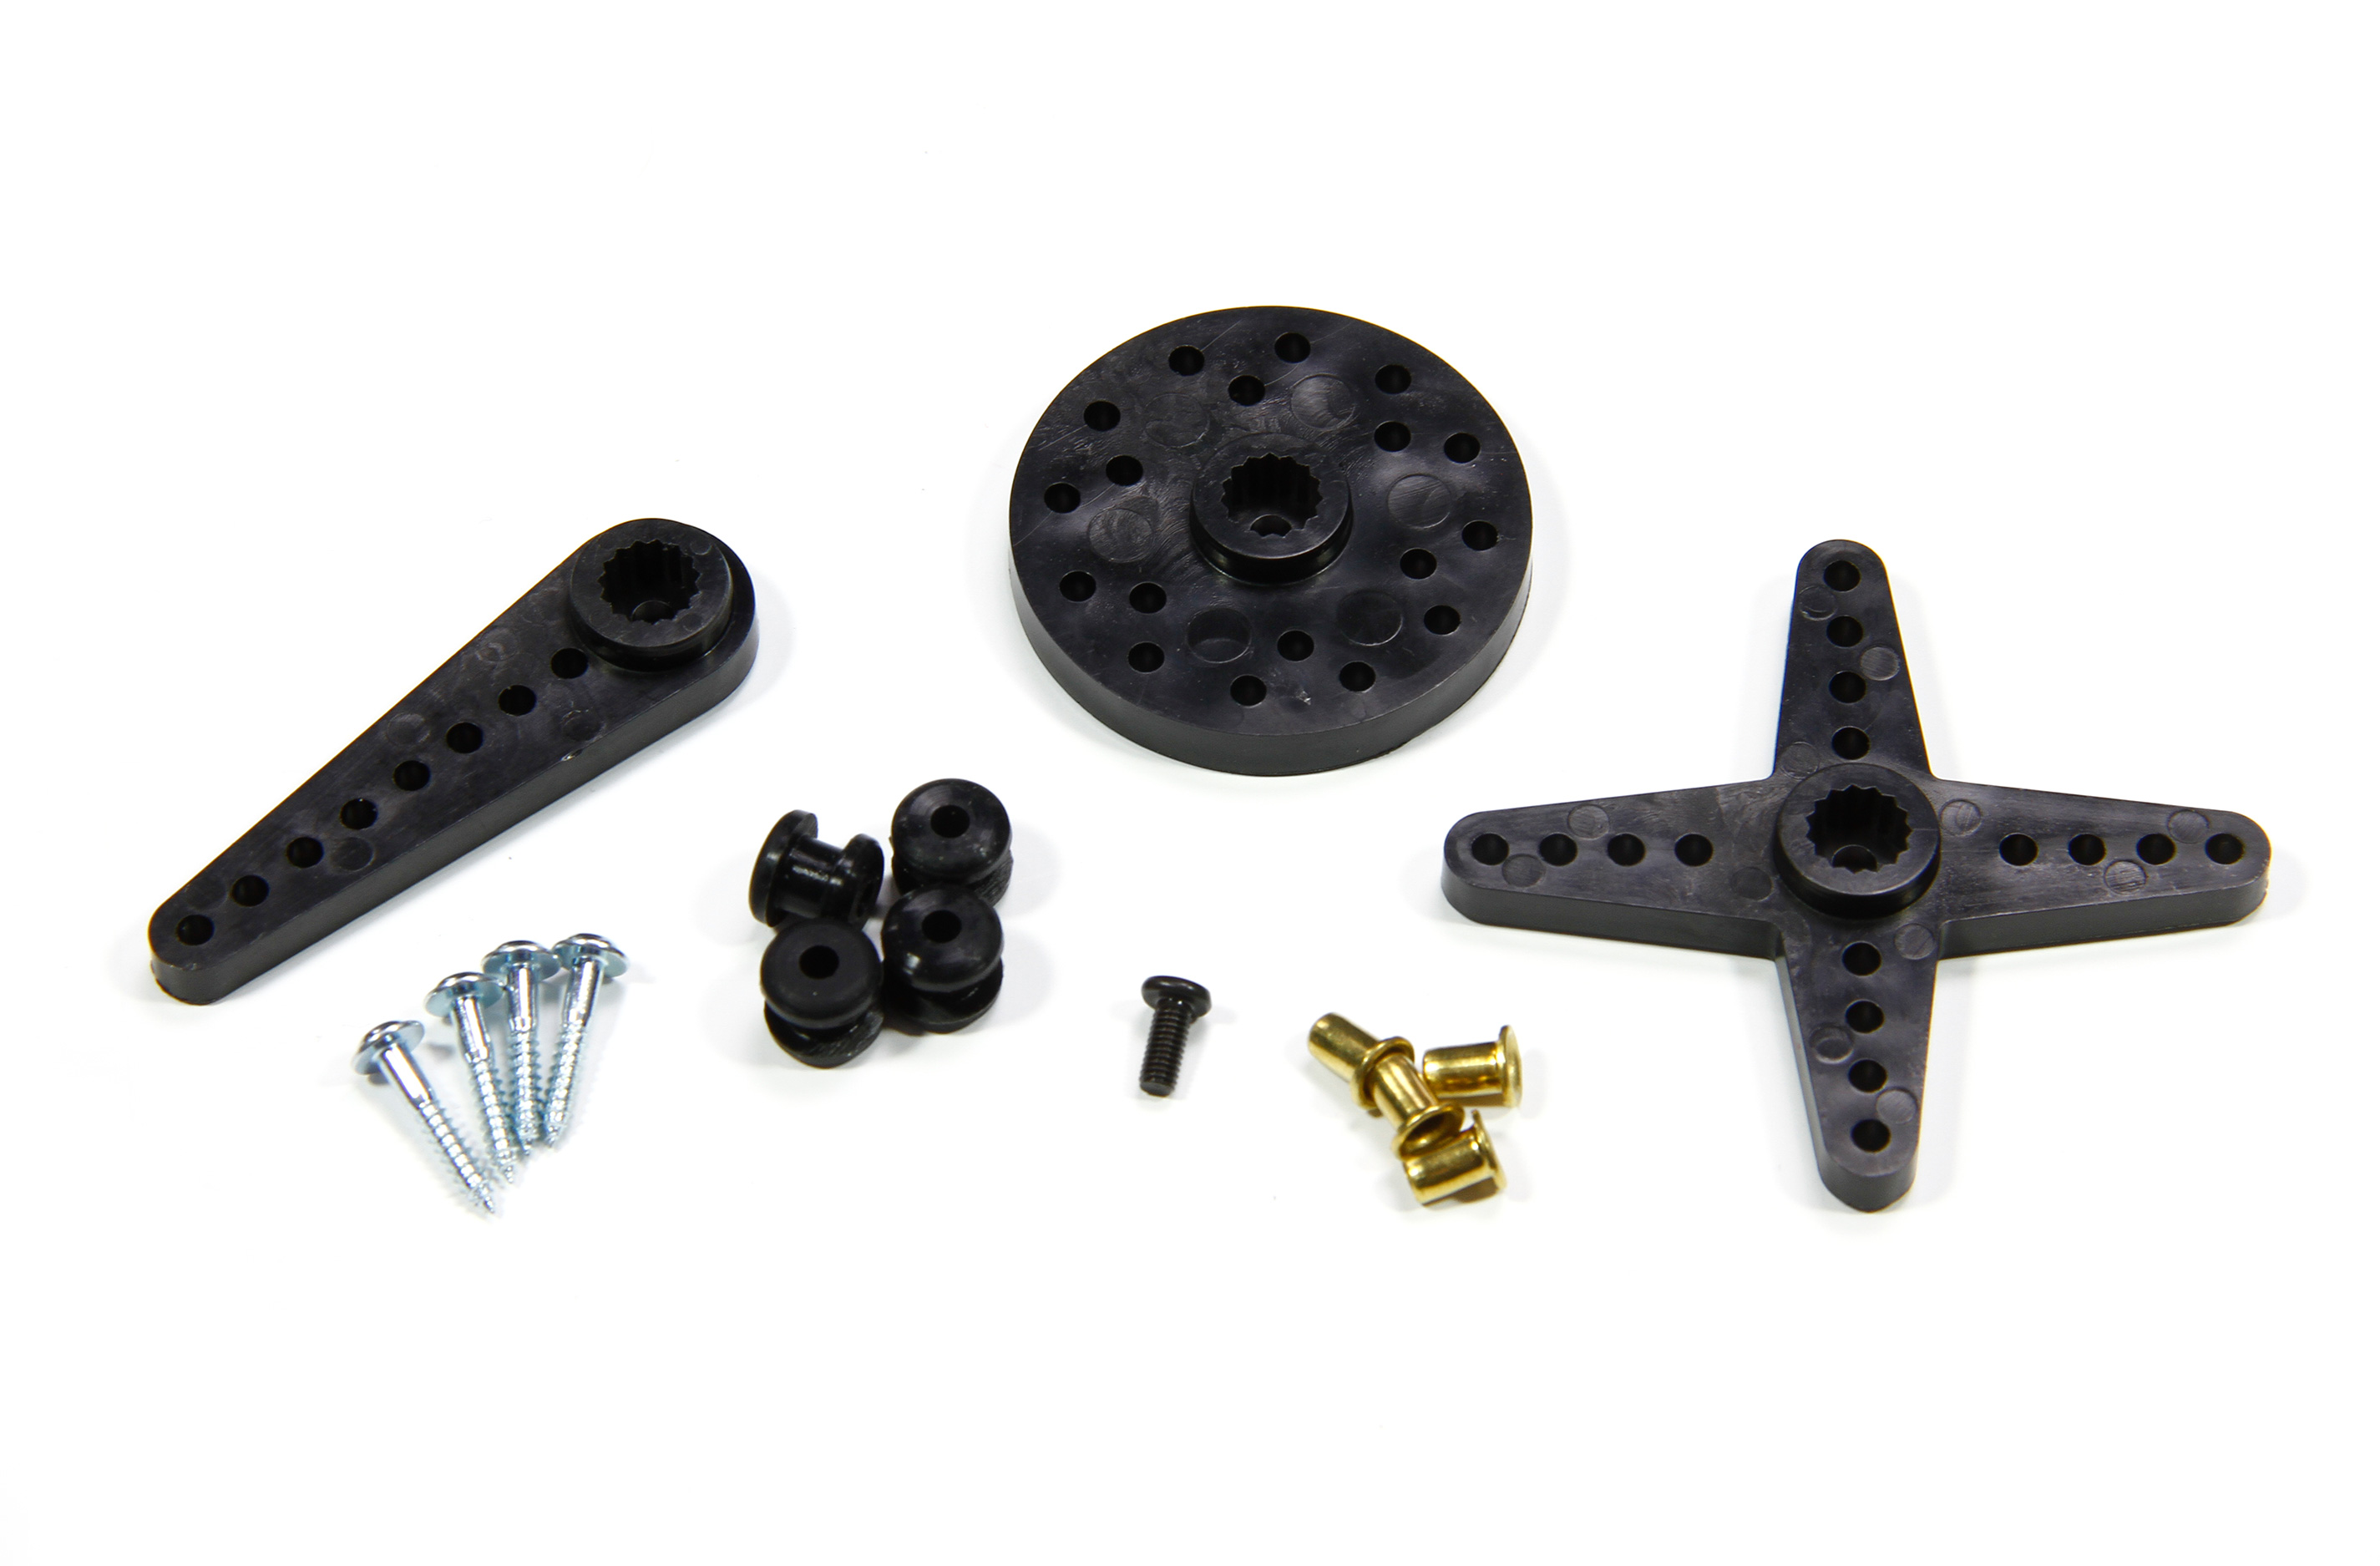 DM4000/02 servo arms, rubber grommets and guide sleeves for K-Power